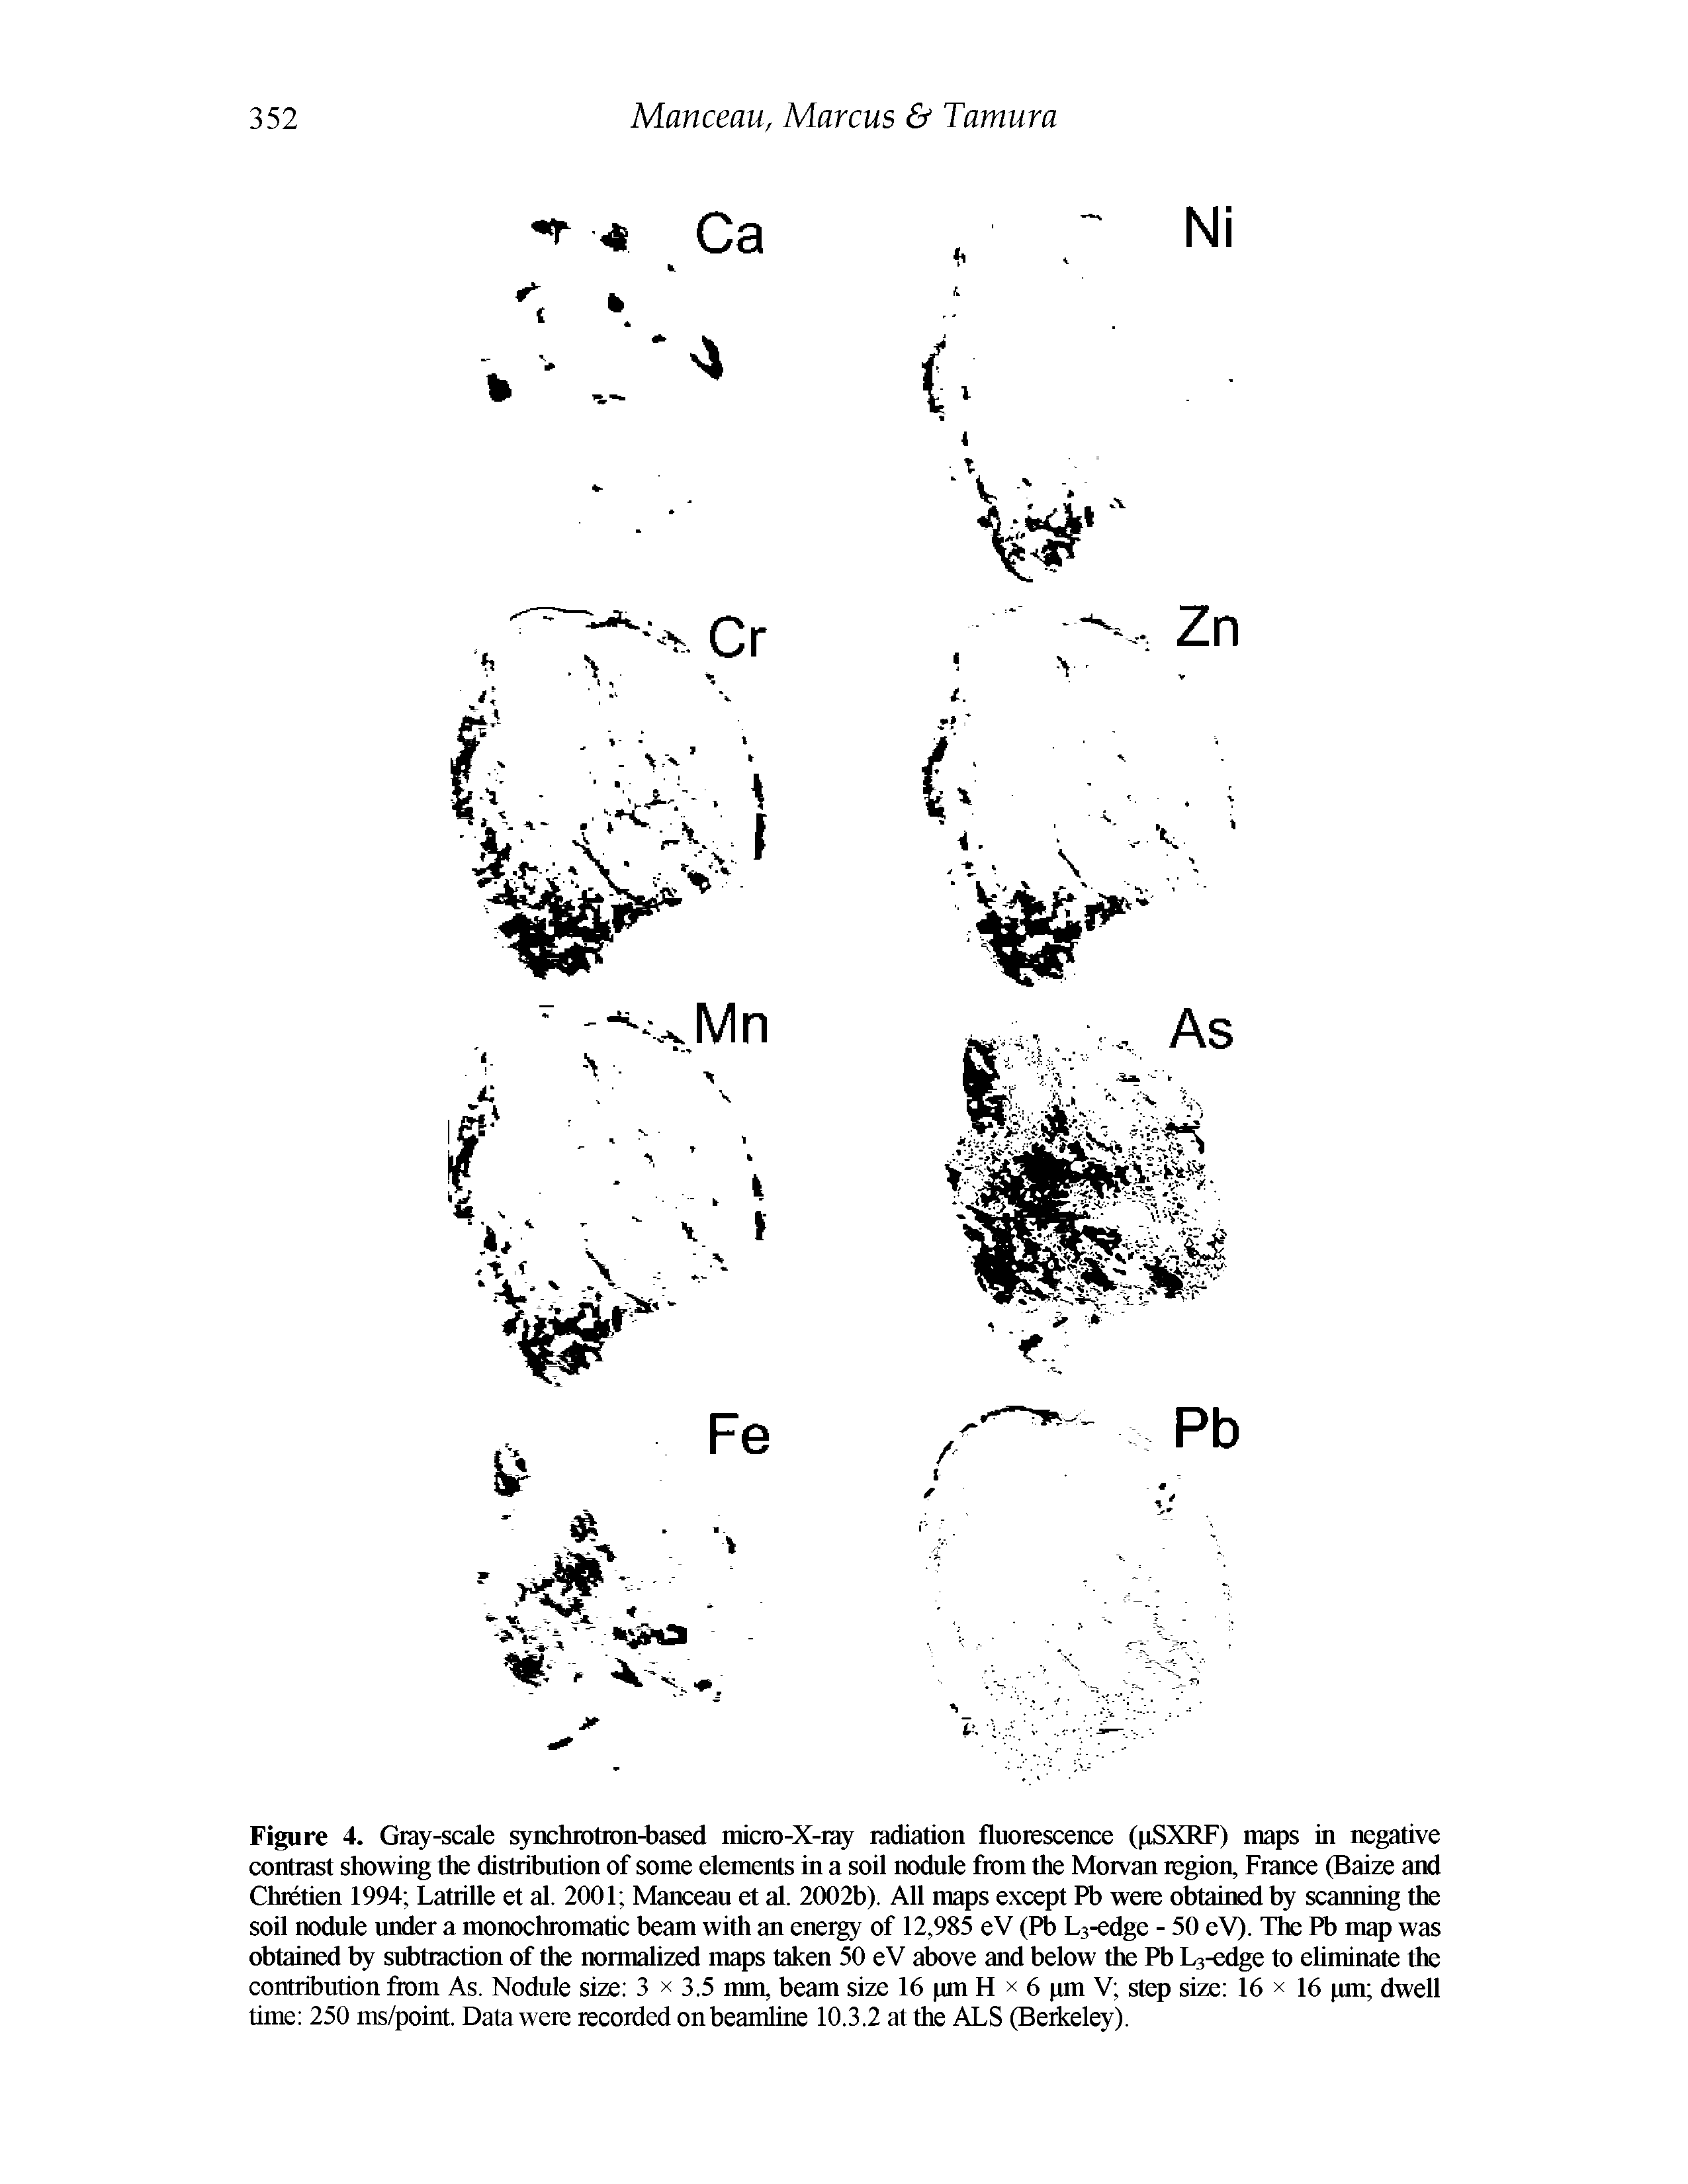 Figure 4. Gray-scale synchrotron-based micro-X-ray radiation fluorescence (pSXRF) maps in negative contrast showing the distribution of some elements in a soil nodule from the Morvan region, France (Baize and Chretien 1994 Latrille et al. 2001 Manceau et al. 2002b). All maps except Fb were obtained by scanning the soil nodule under a monochromatic beam with an energy of 12,985 eV (Pb L3-edge - 50 eV). The Pb map was obtained by subtraction of the normalized maps taken 50 eV above and below the Pb Le-edge to eliminate the contribution from As. Nodule size 3 x 3.5 mm, beam size 16 pm H x 6 pm V step size 16 x 16 pm dwell time 250 ms/point. Data were recorded on beamline 10.3.2 at the ALS (Beikeley).